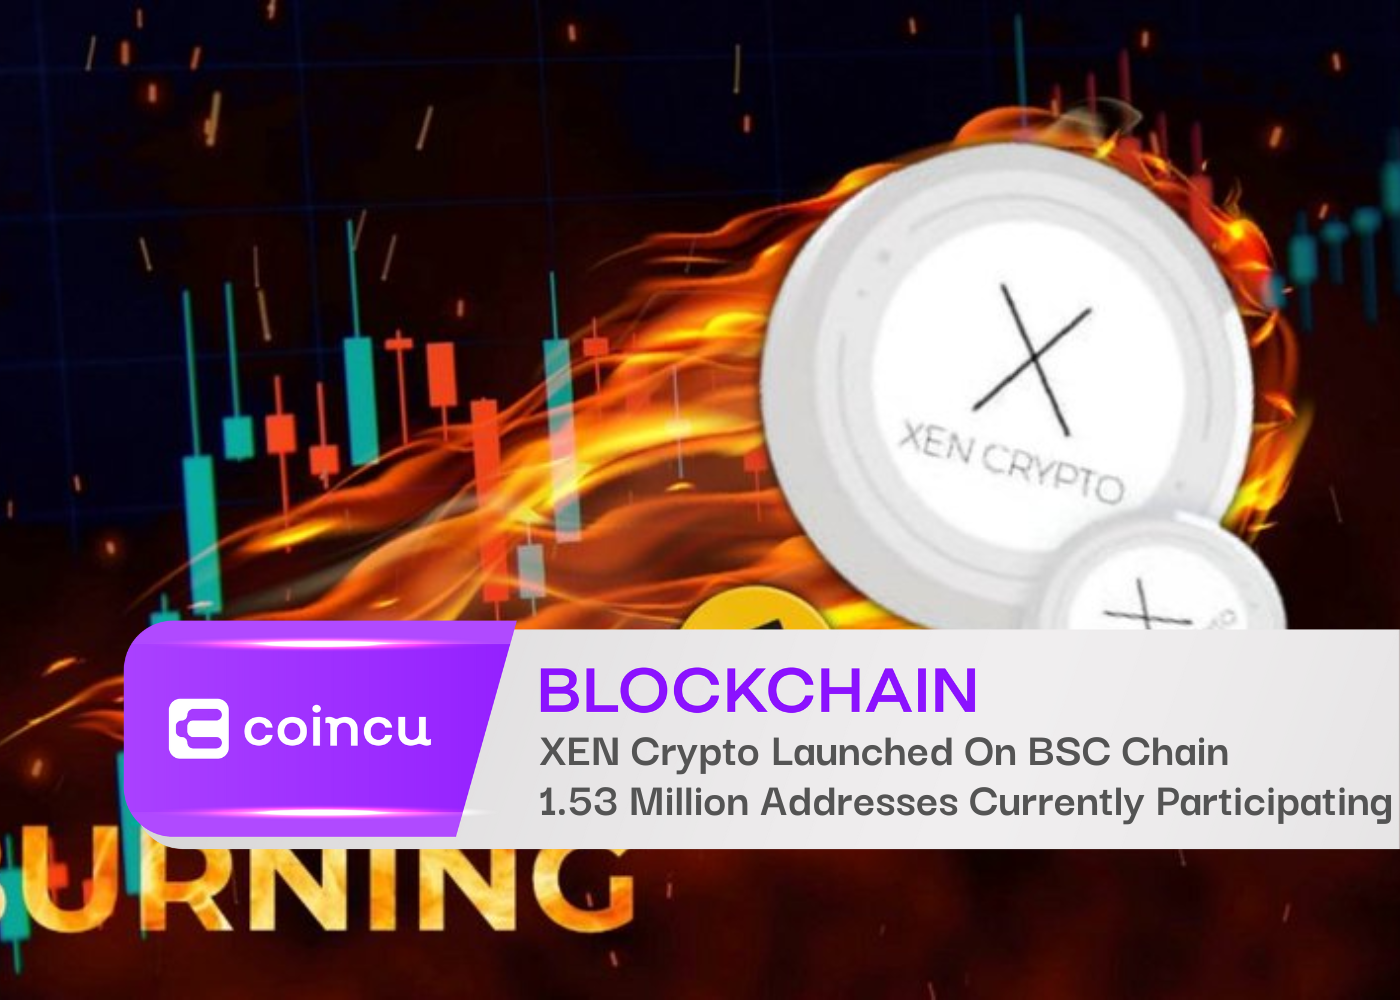 XEN Crypto Launched On BSC Chain More Than 1.53 Million Addresses Currently Participating